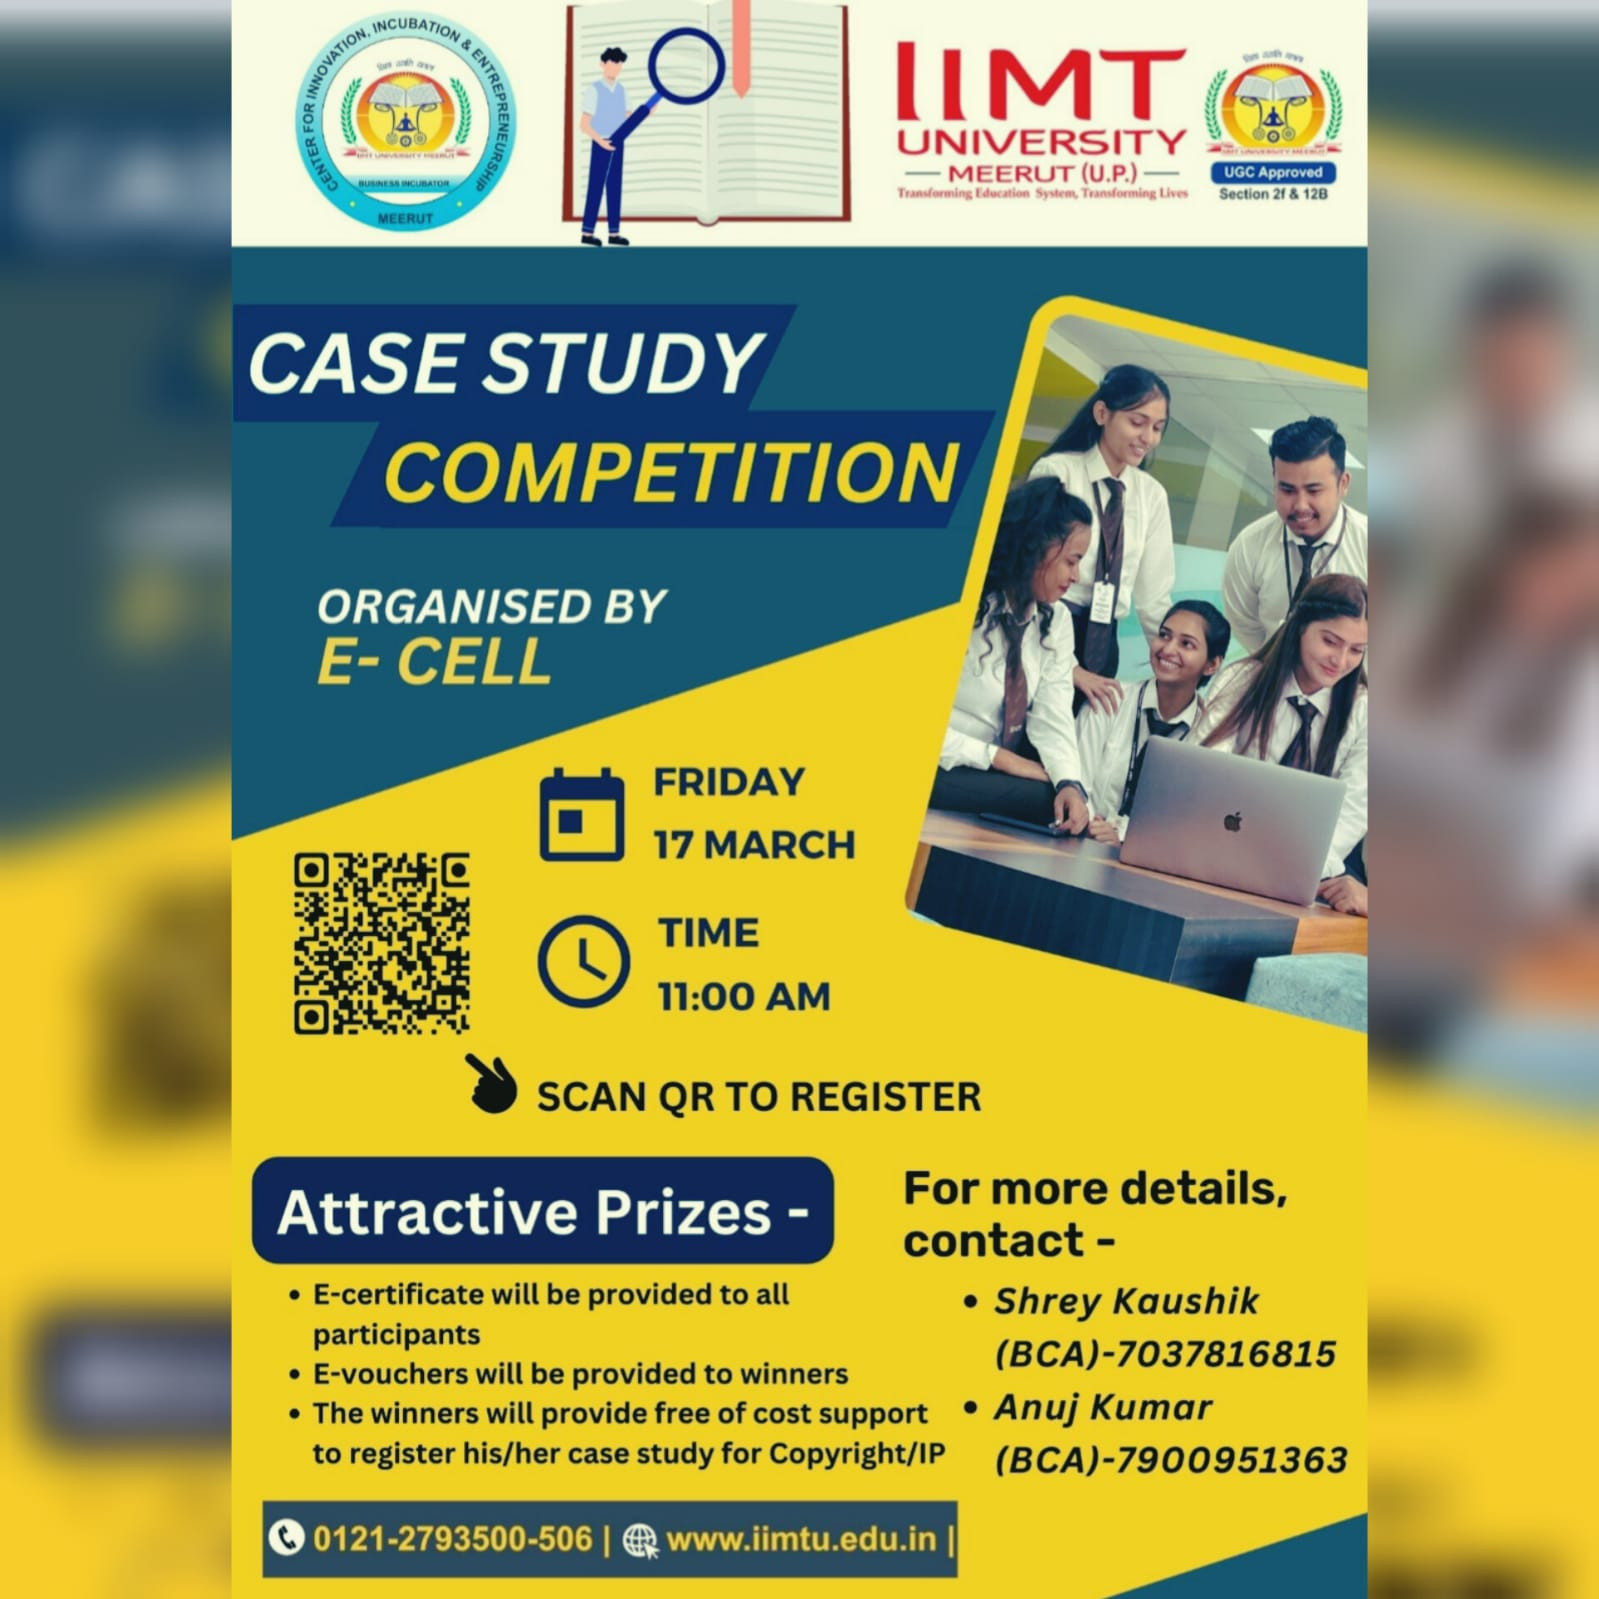 E-Cell IIMTU Organizes Successful Case Study Competition with Distinguished Judges, Winning Teams Announced